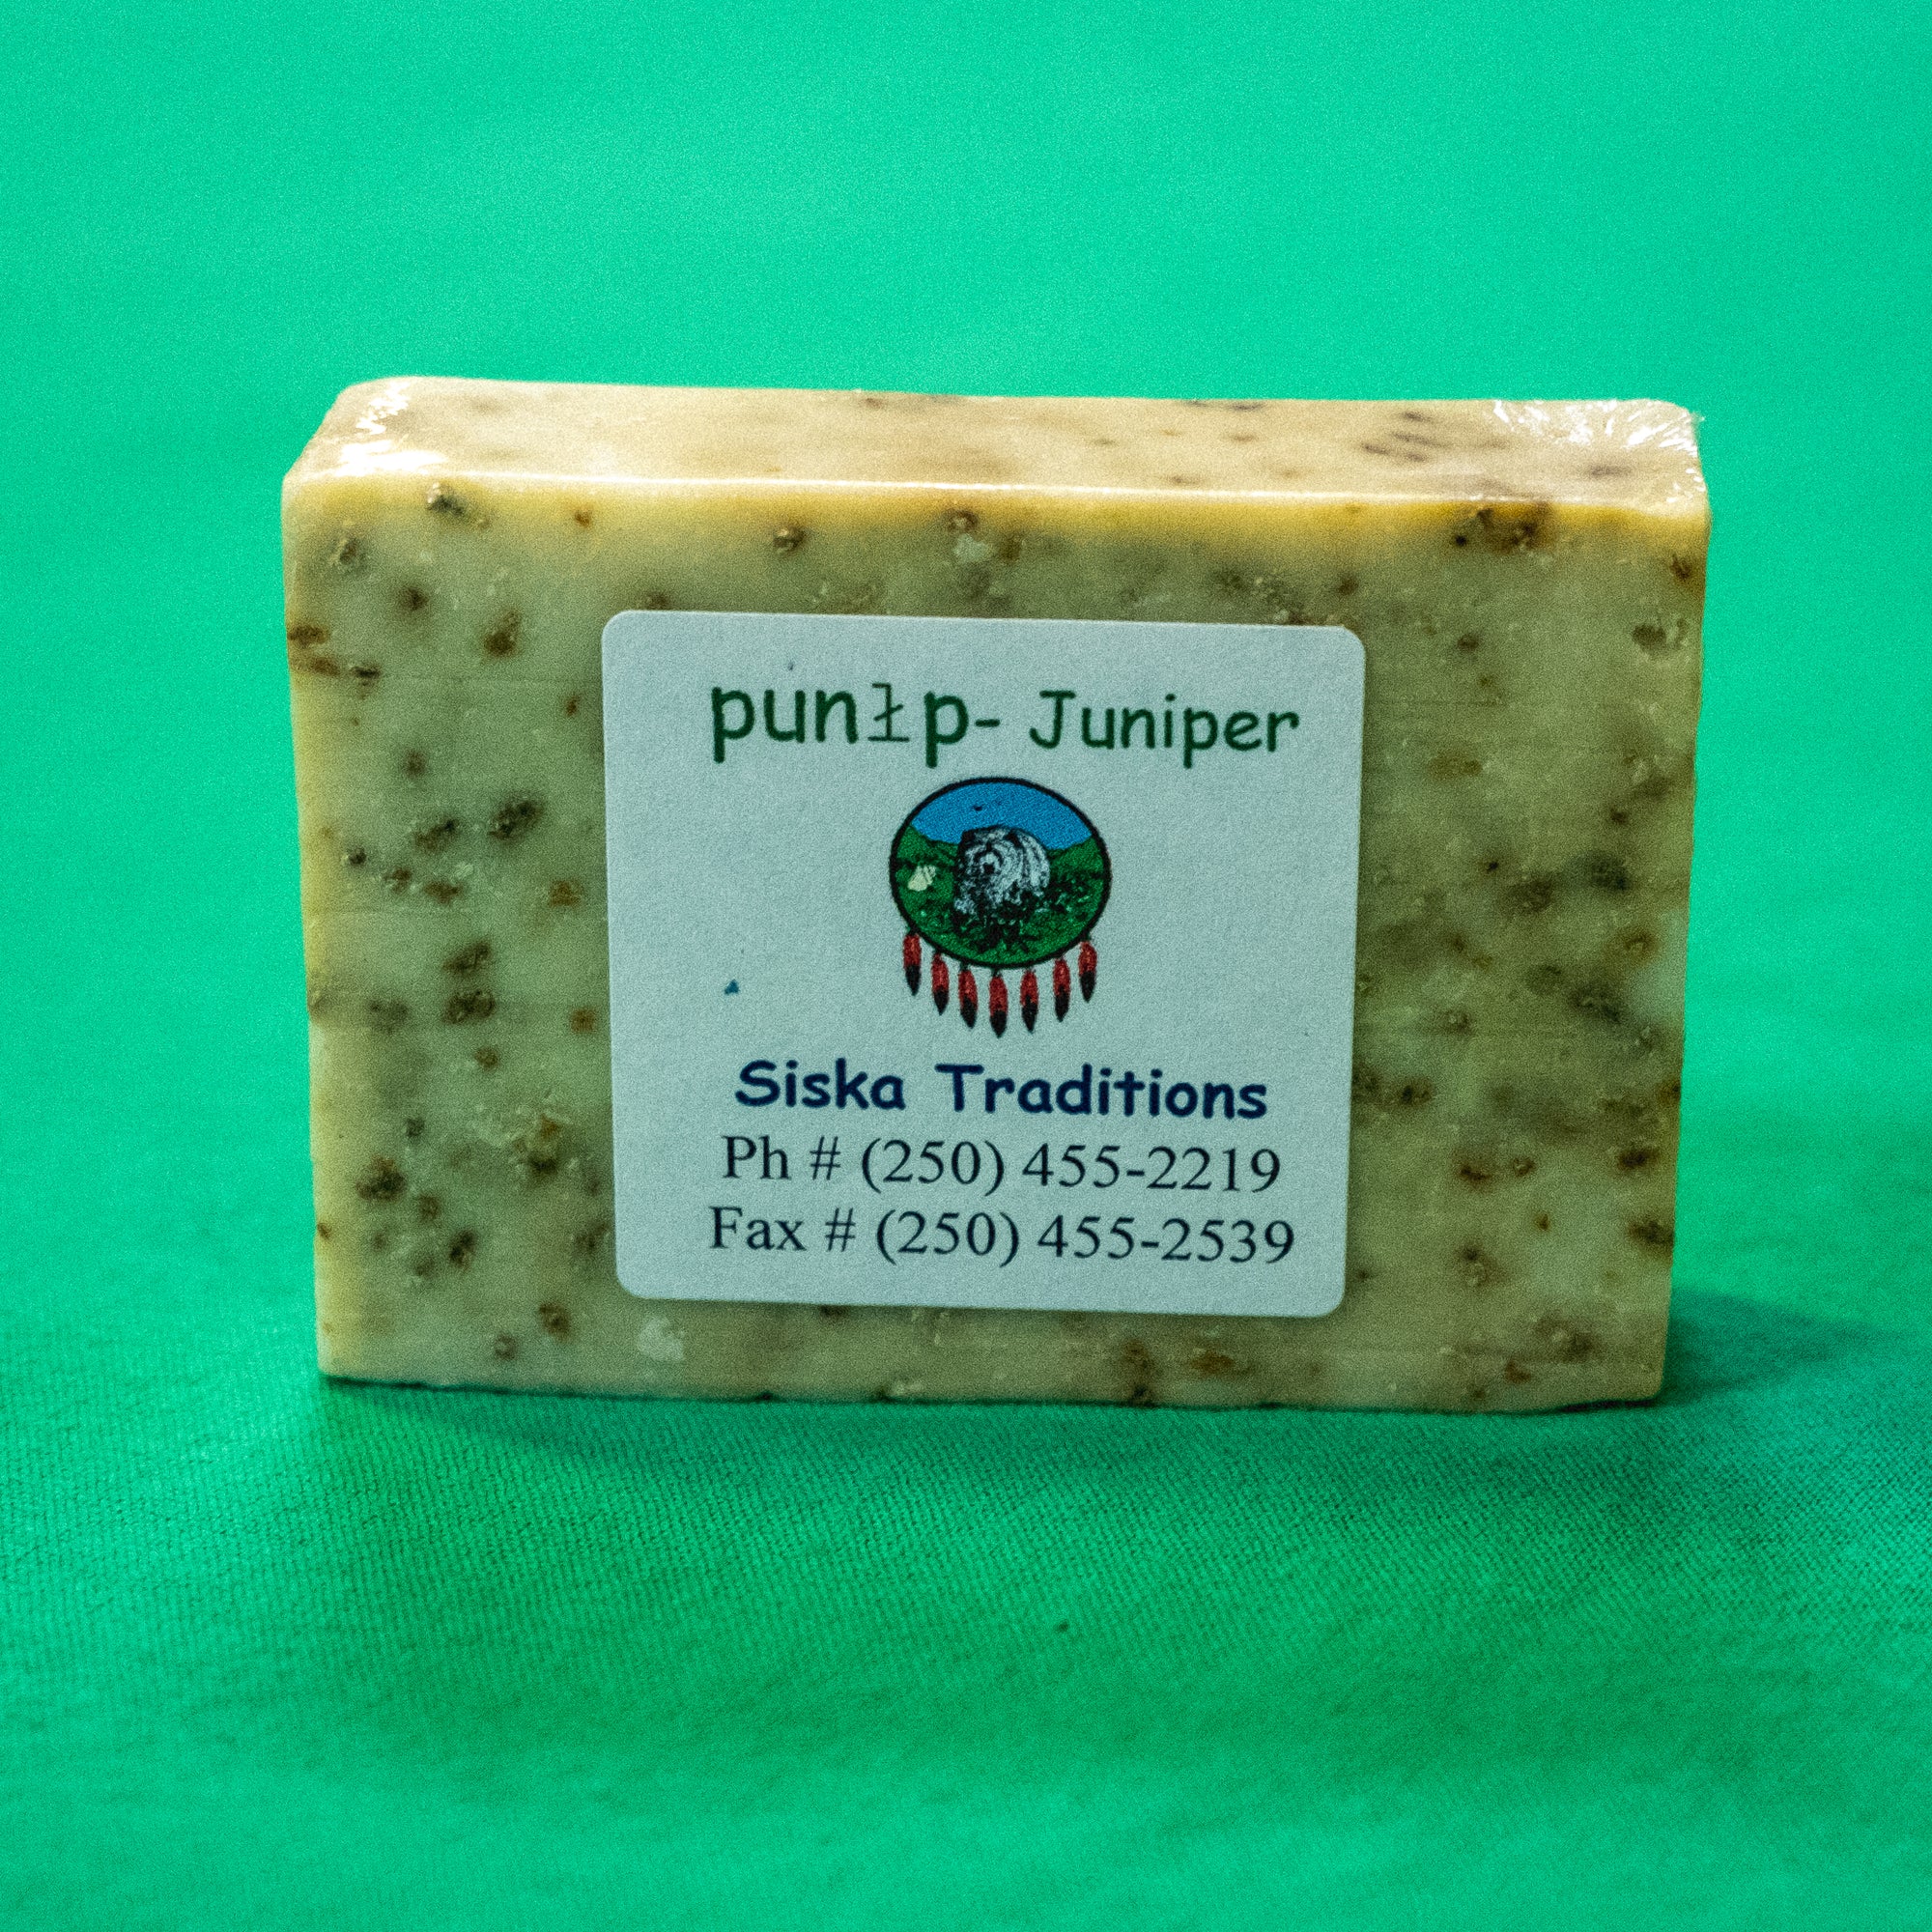 A bar of soap with a label on it that says "Punłp - Juniper. Siska Traditions. Phone: 250-455-2219. Fax: 250-455-2539." End of image description.